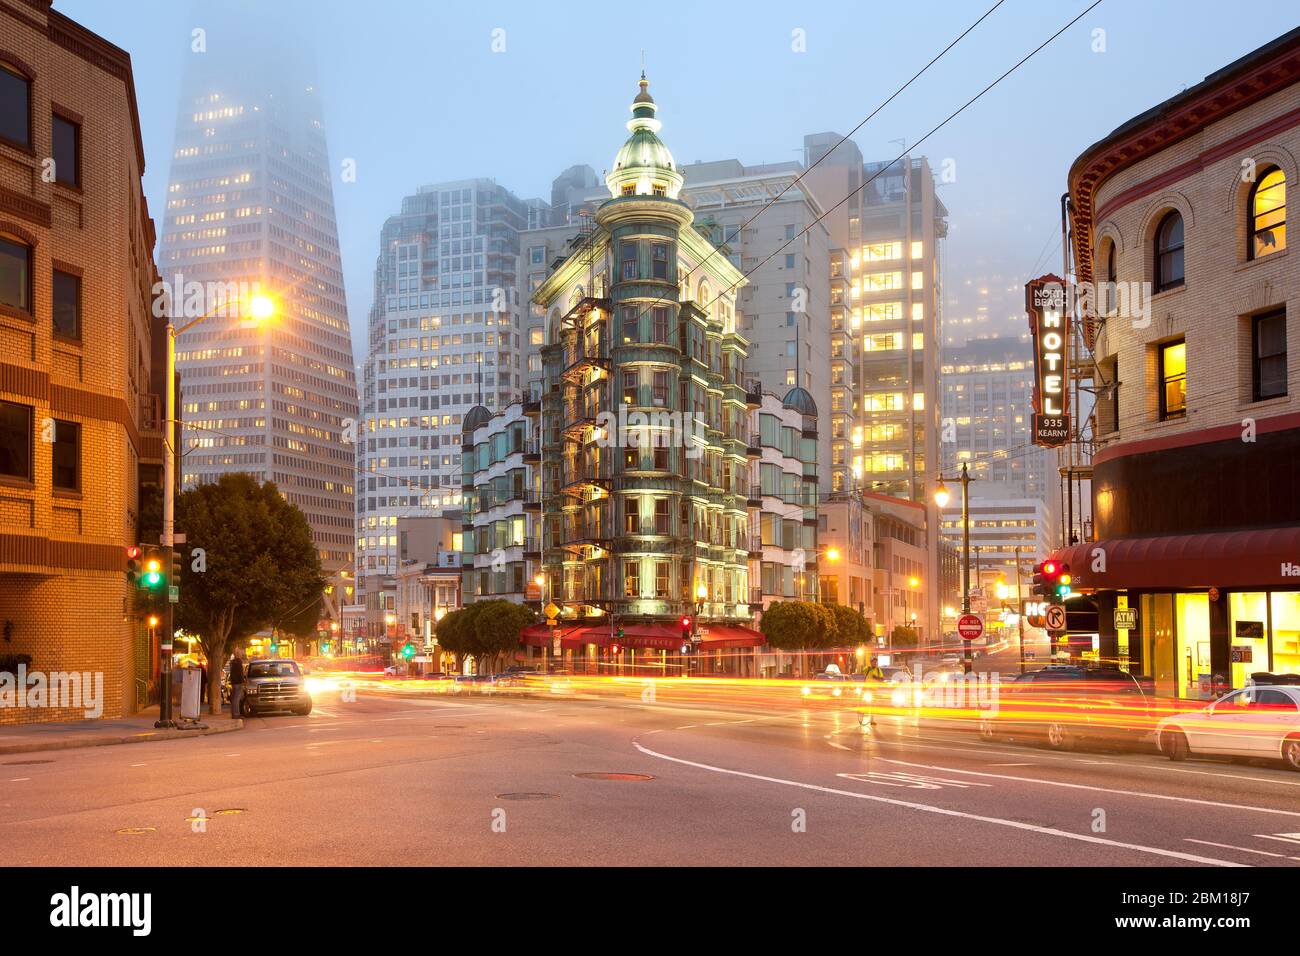 San Francisco, California, United States - Light trails at Columbus Avenue with Sentinel building and Transamerica Pyramid Building. Stock Photo